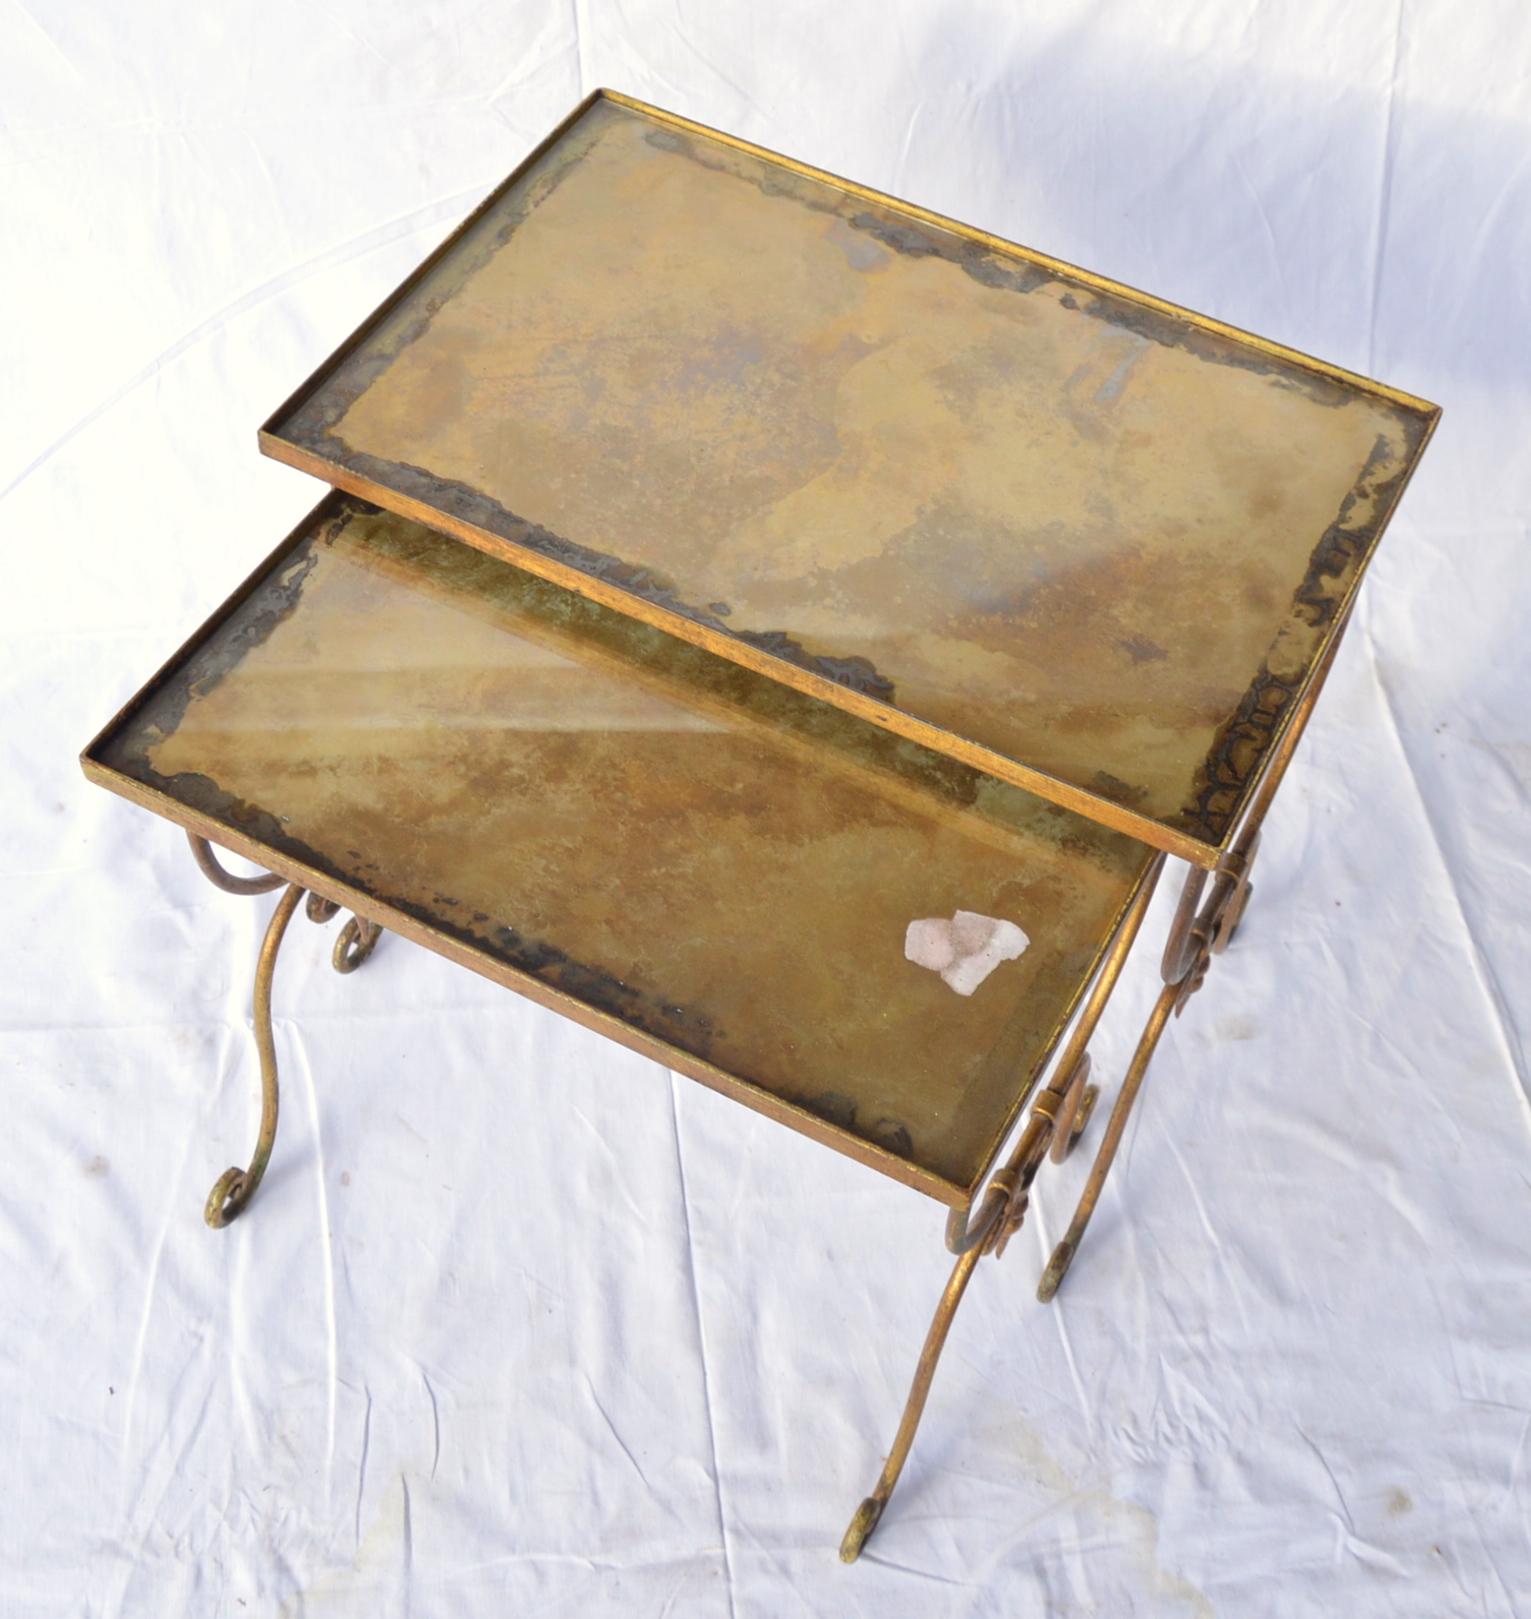 Pair of vintage nesting metal mounted tables with oxidized glass top.
Dimensions: 52x34, height - 48 cm.
Condition report: Oxidation exfoliation resulting transparent white spots in several places.